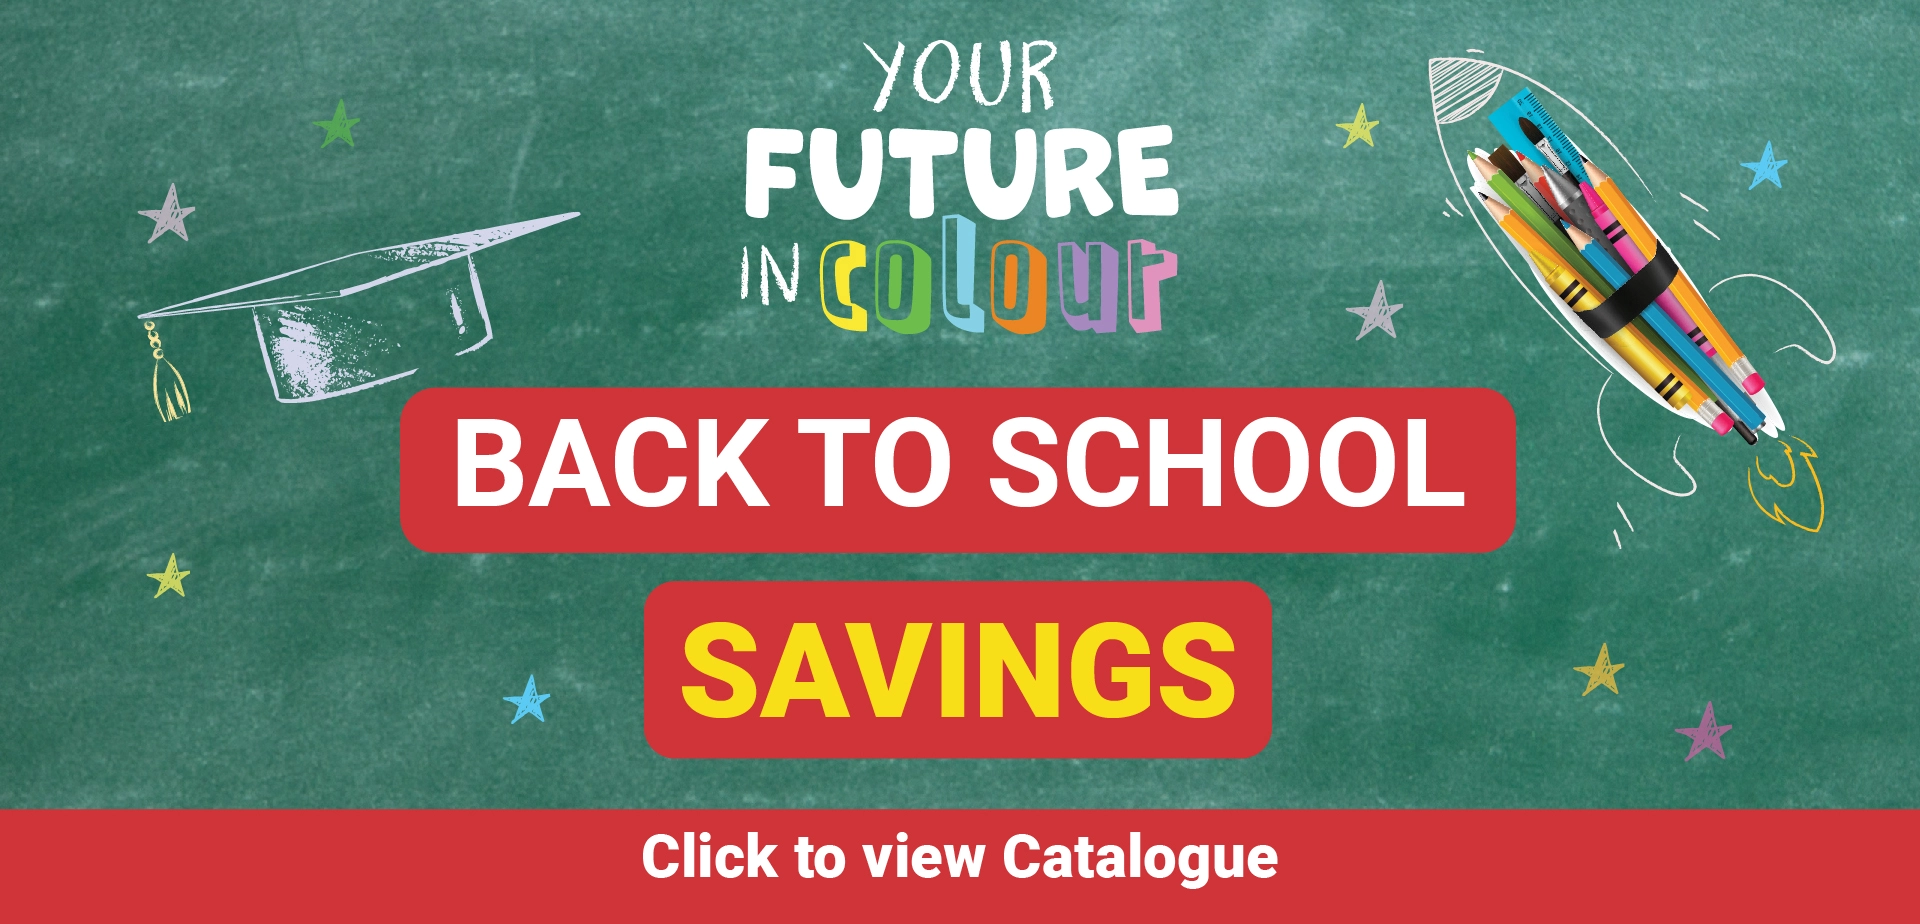 Back to School Shopping: The Extras That Will Make Your Little One’s Life Easier